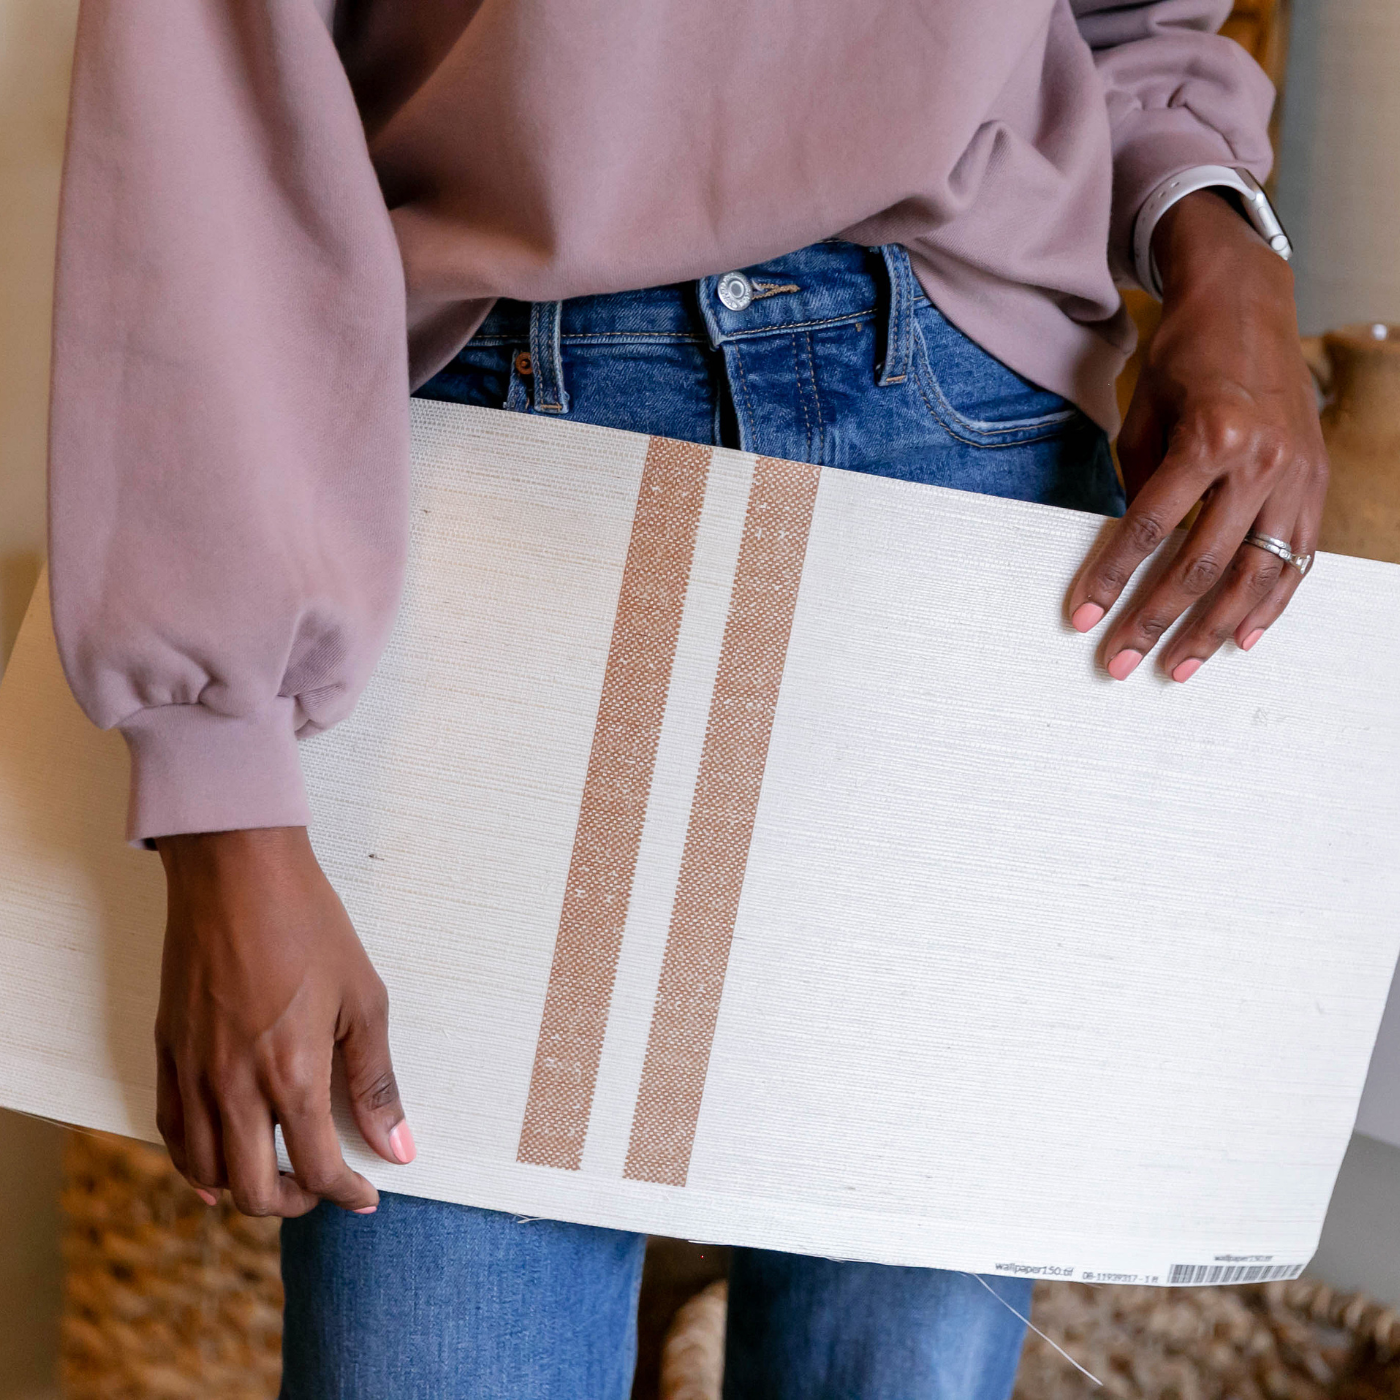 A photo of Tiffany holding a swatch of grasscloth wallpaper down by her waist. Her hands, torso and legs are shown. She is wearing a mauve blouse tucked into blue jeans. The design on the wallpaper has a cream background and two small dark tan repeating stripes.